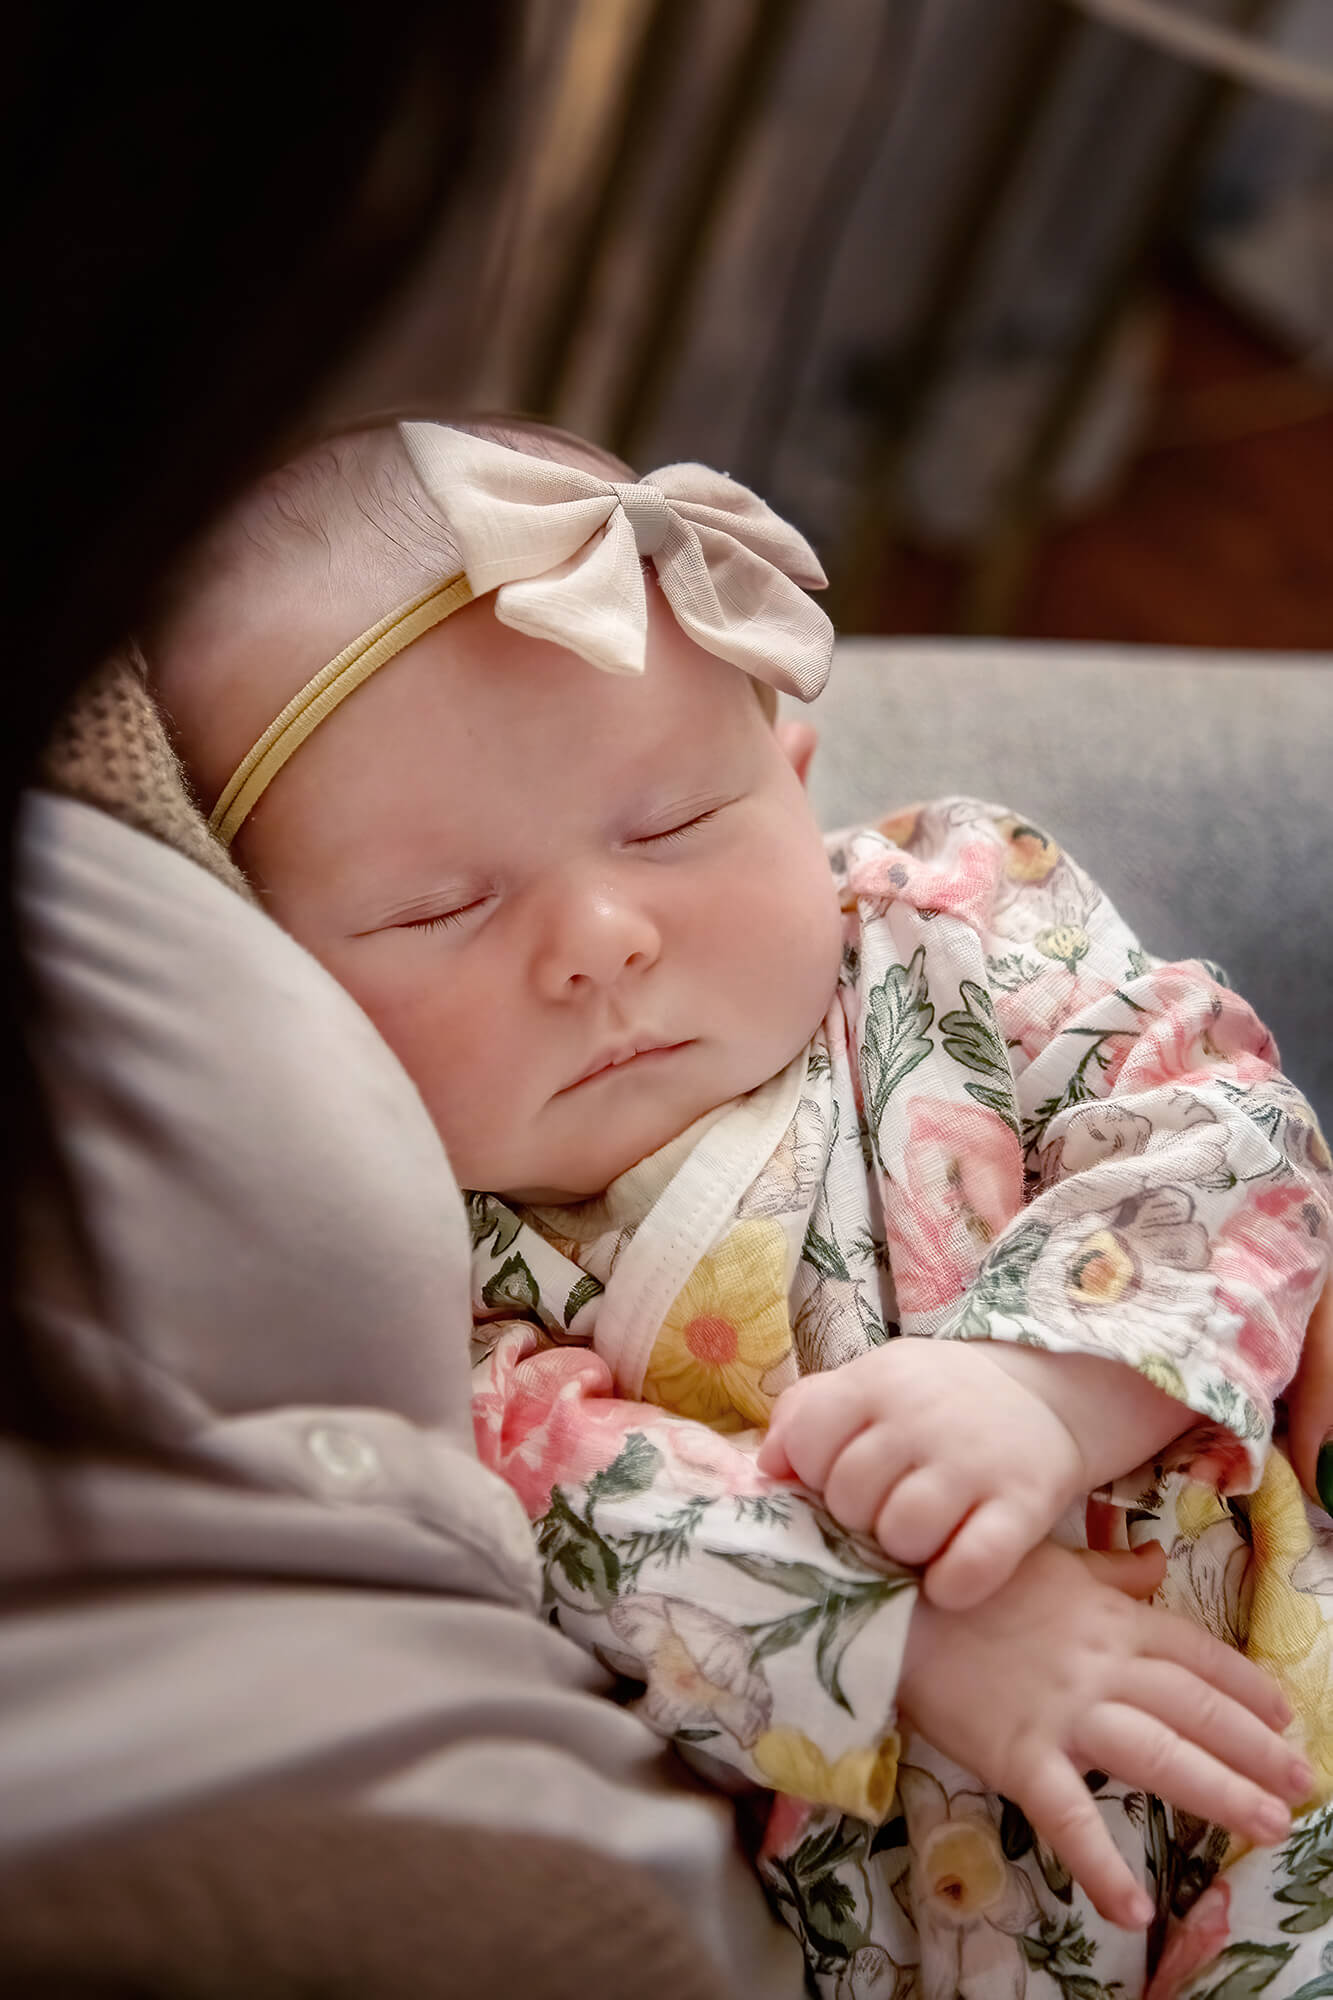 Adorable newborn baby girl in her mom's arms